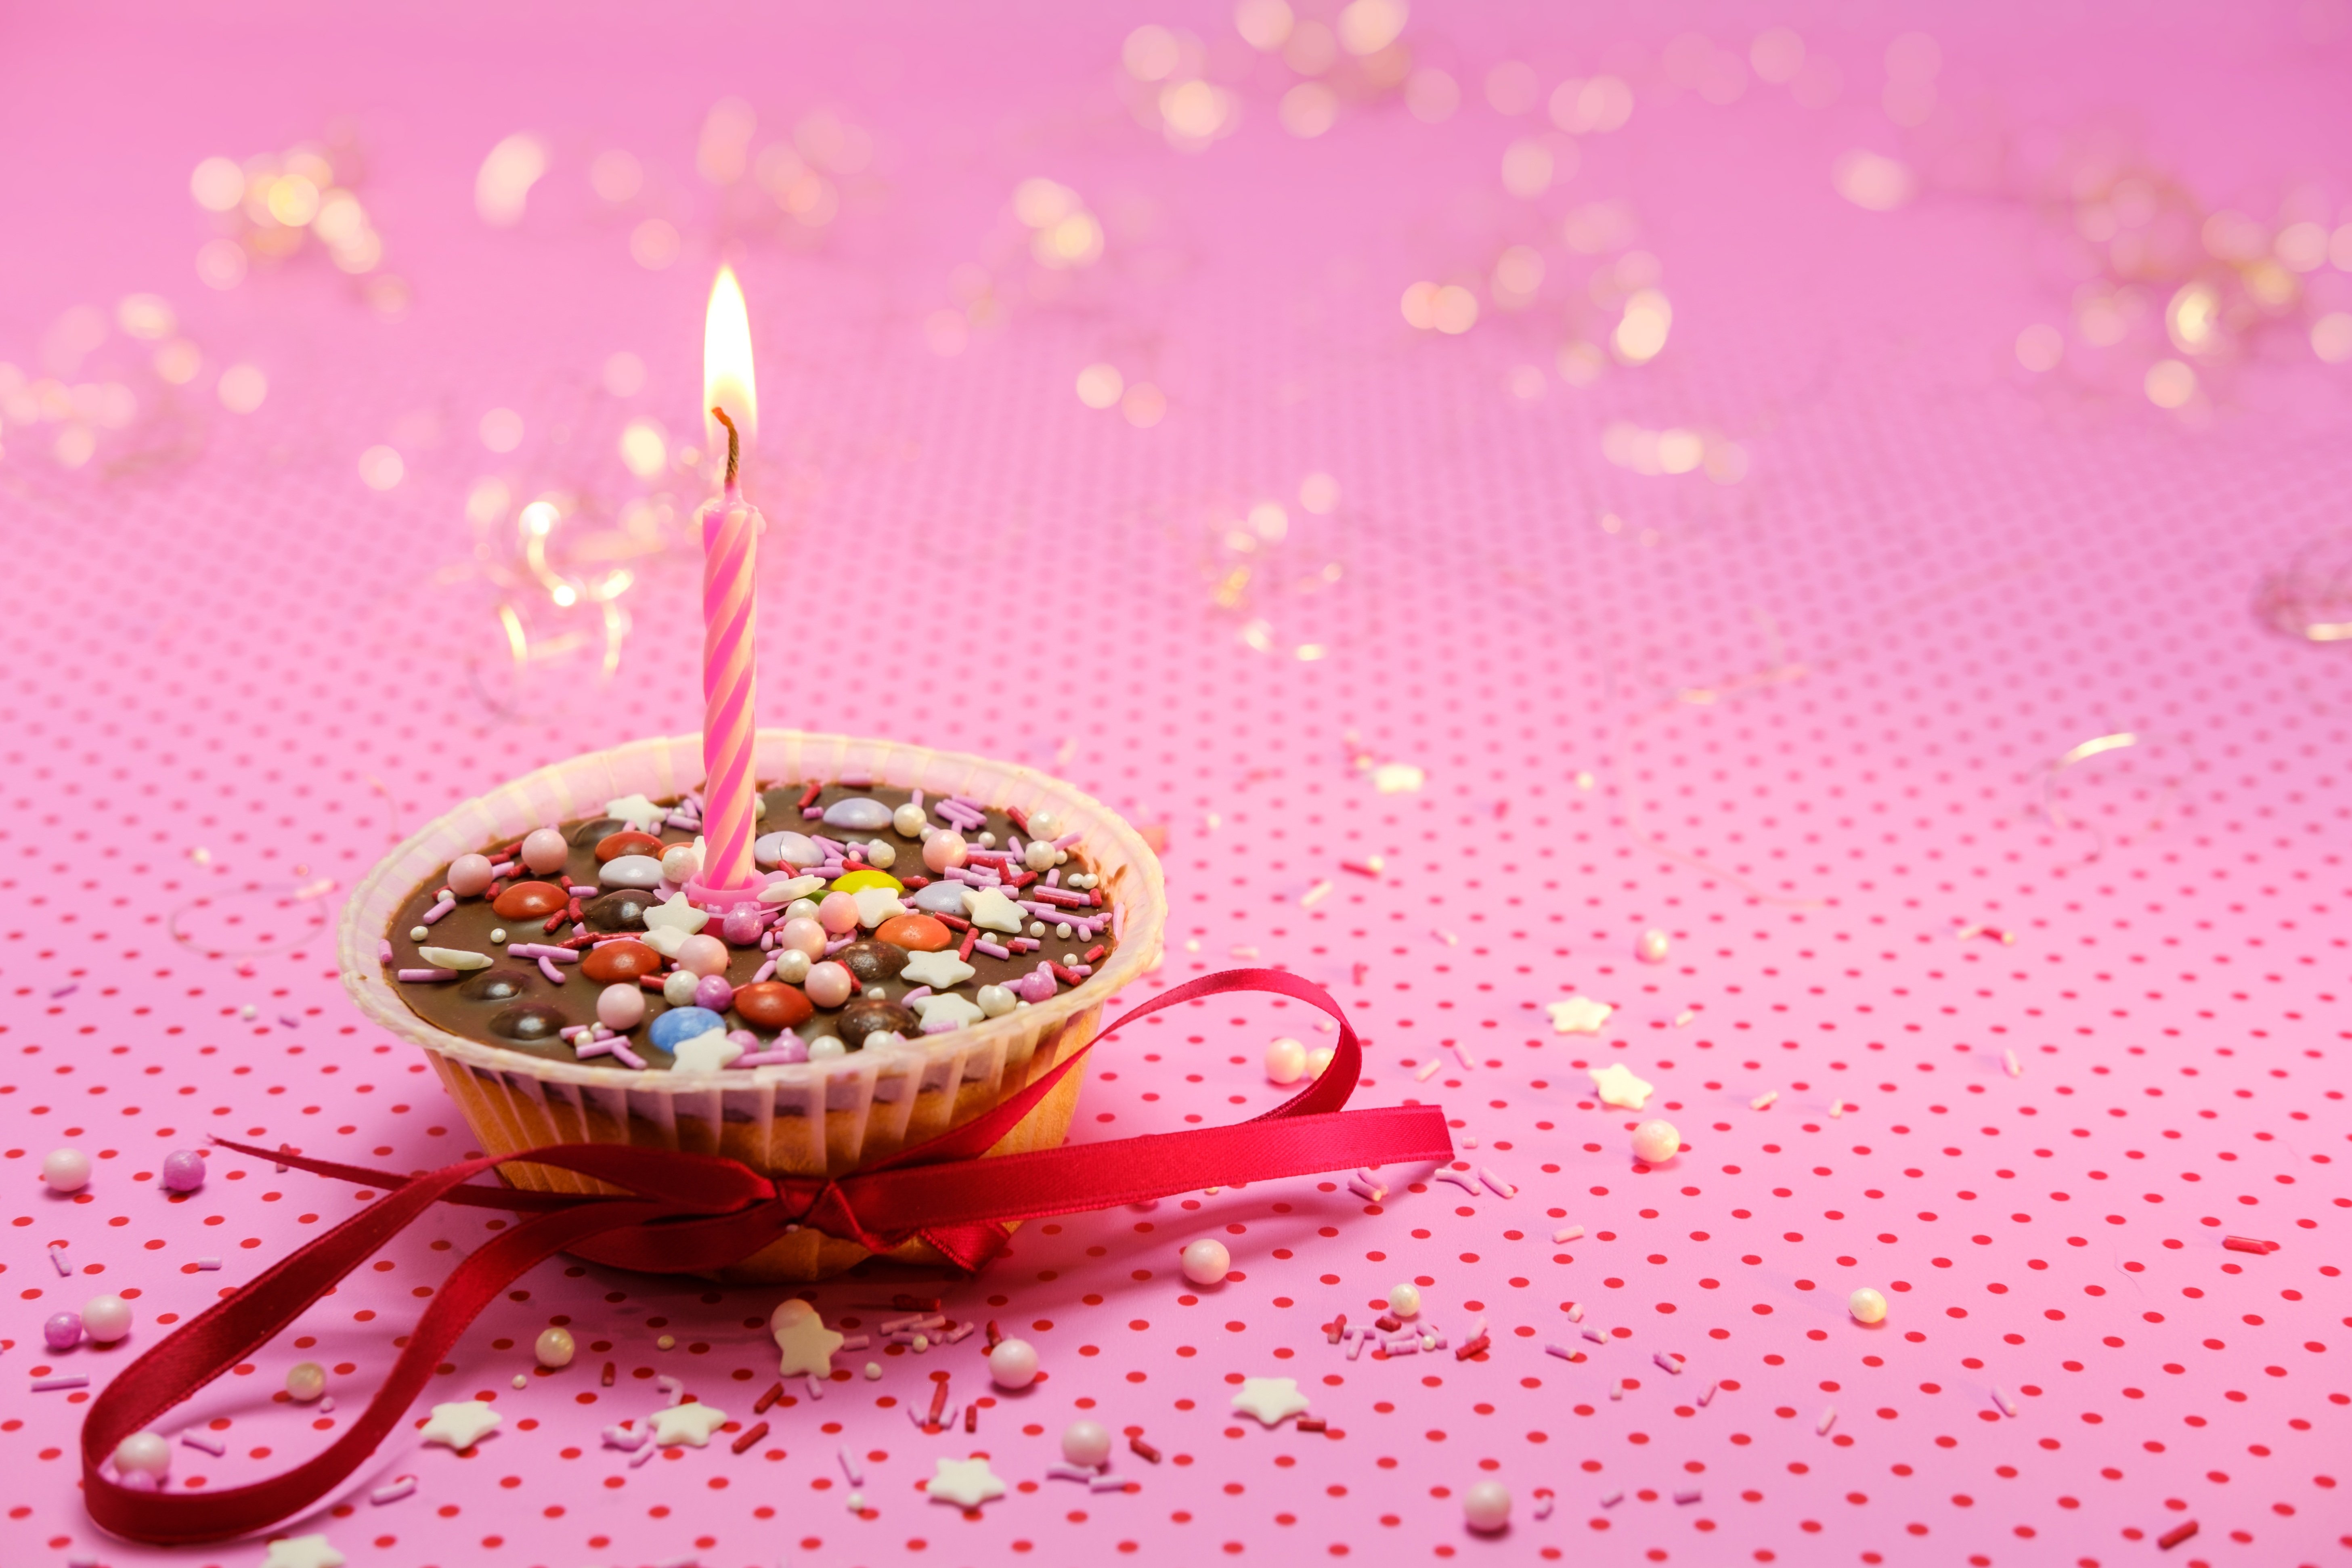 HD wallpaper, Birthday, Candle Light, 5K, Red Ribbon, Dessert, Cupcake, Pink Background, Muffin, Sugar Sprinkles, Aesthetic